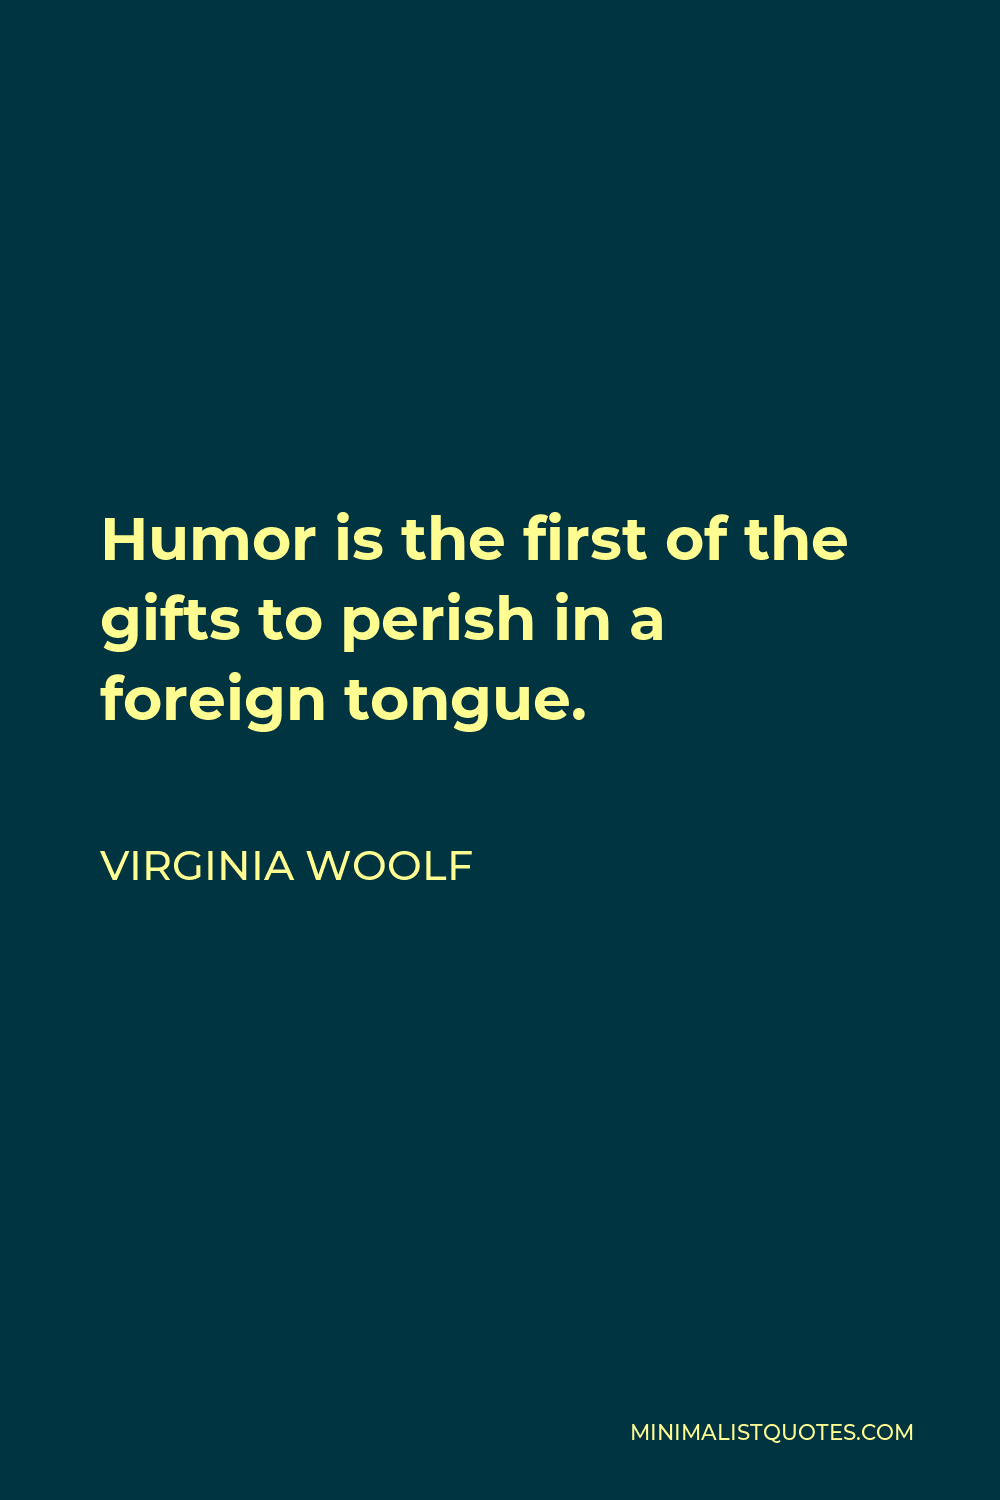 Virginia Woolf Quote - Humor is the first of the gifts to perish in a foreign tongue.